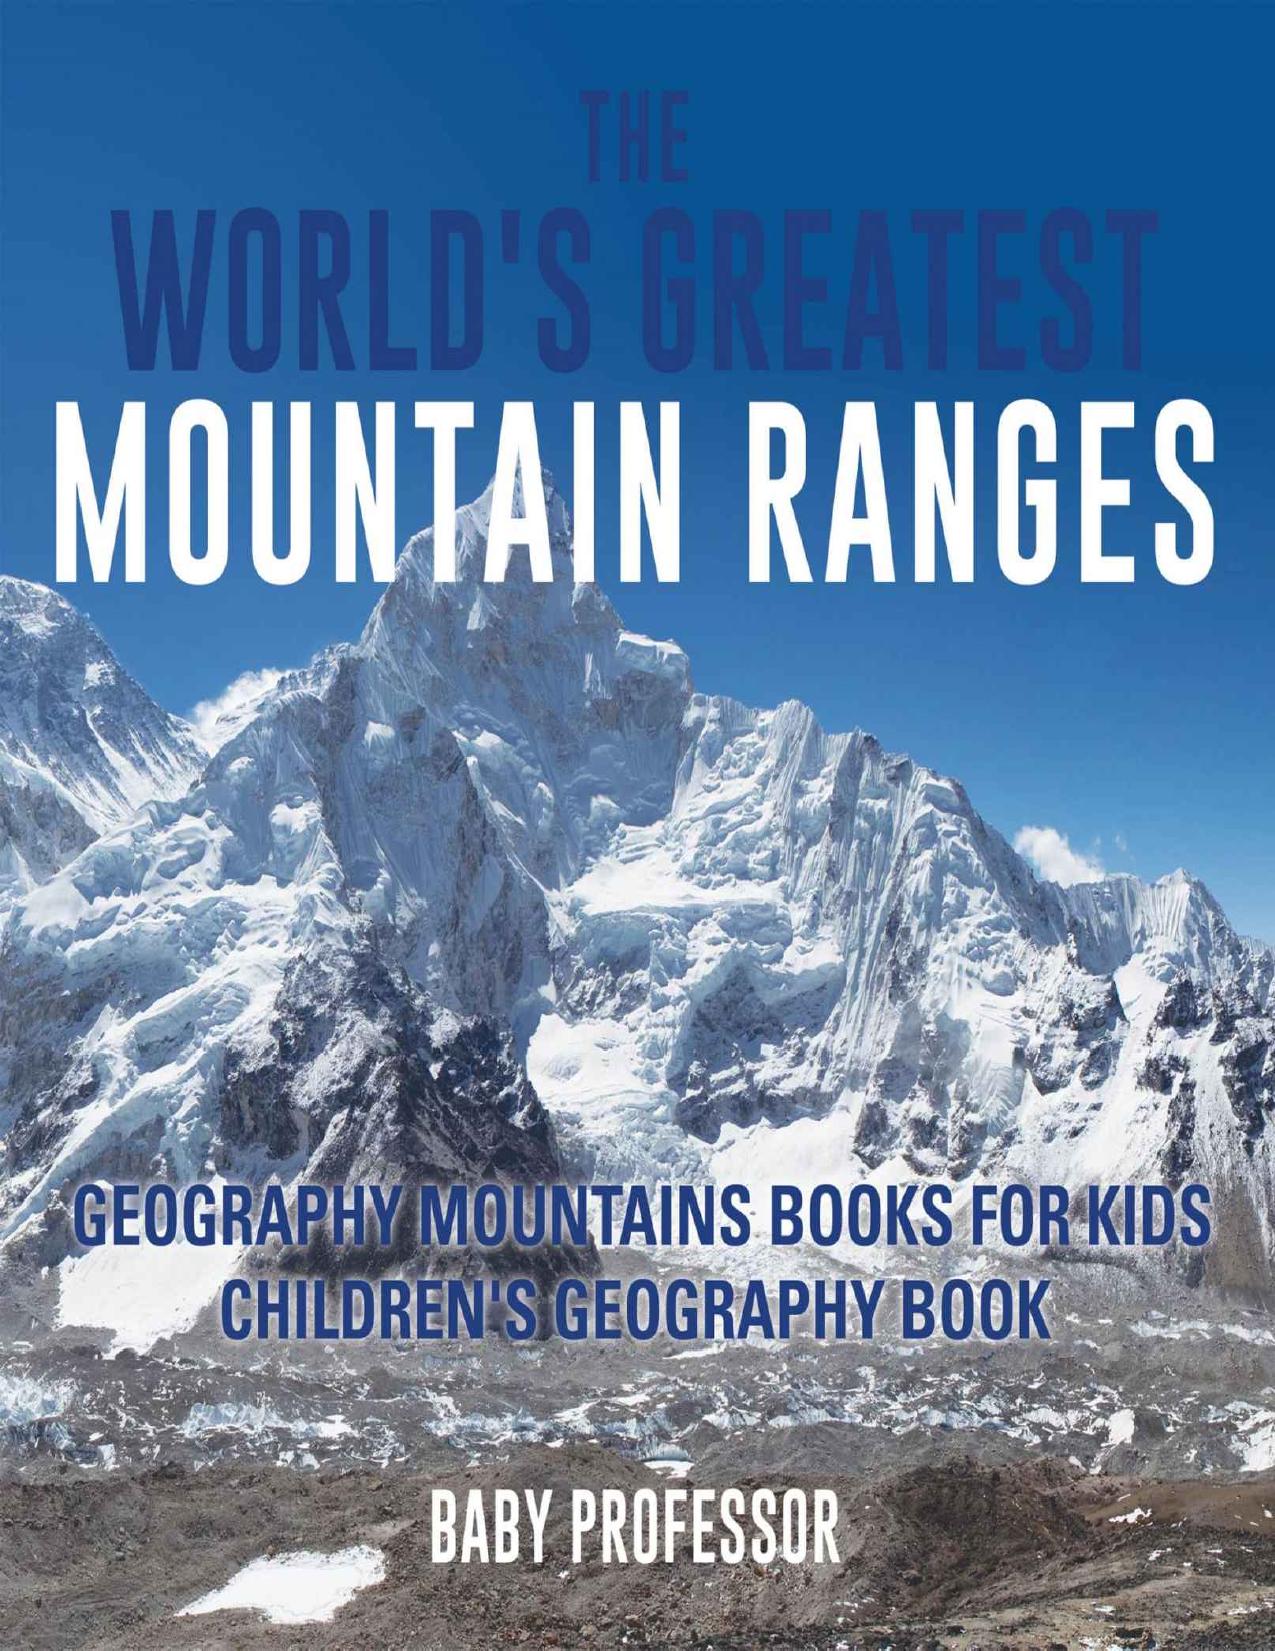 The World's Greatest Mountain Ranges - Geography Mountains Books for Kids | Children's Geography Book by Baby Professor